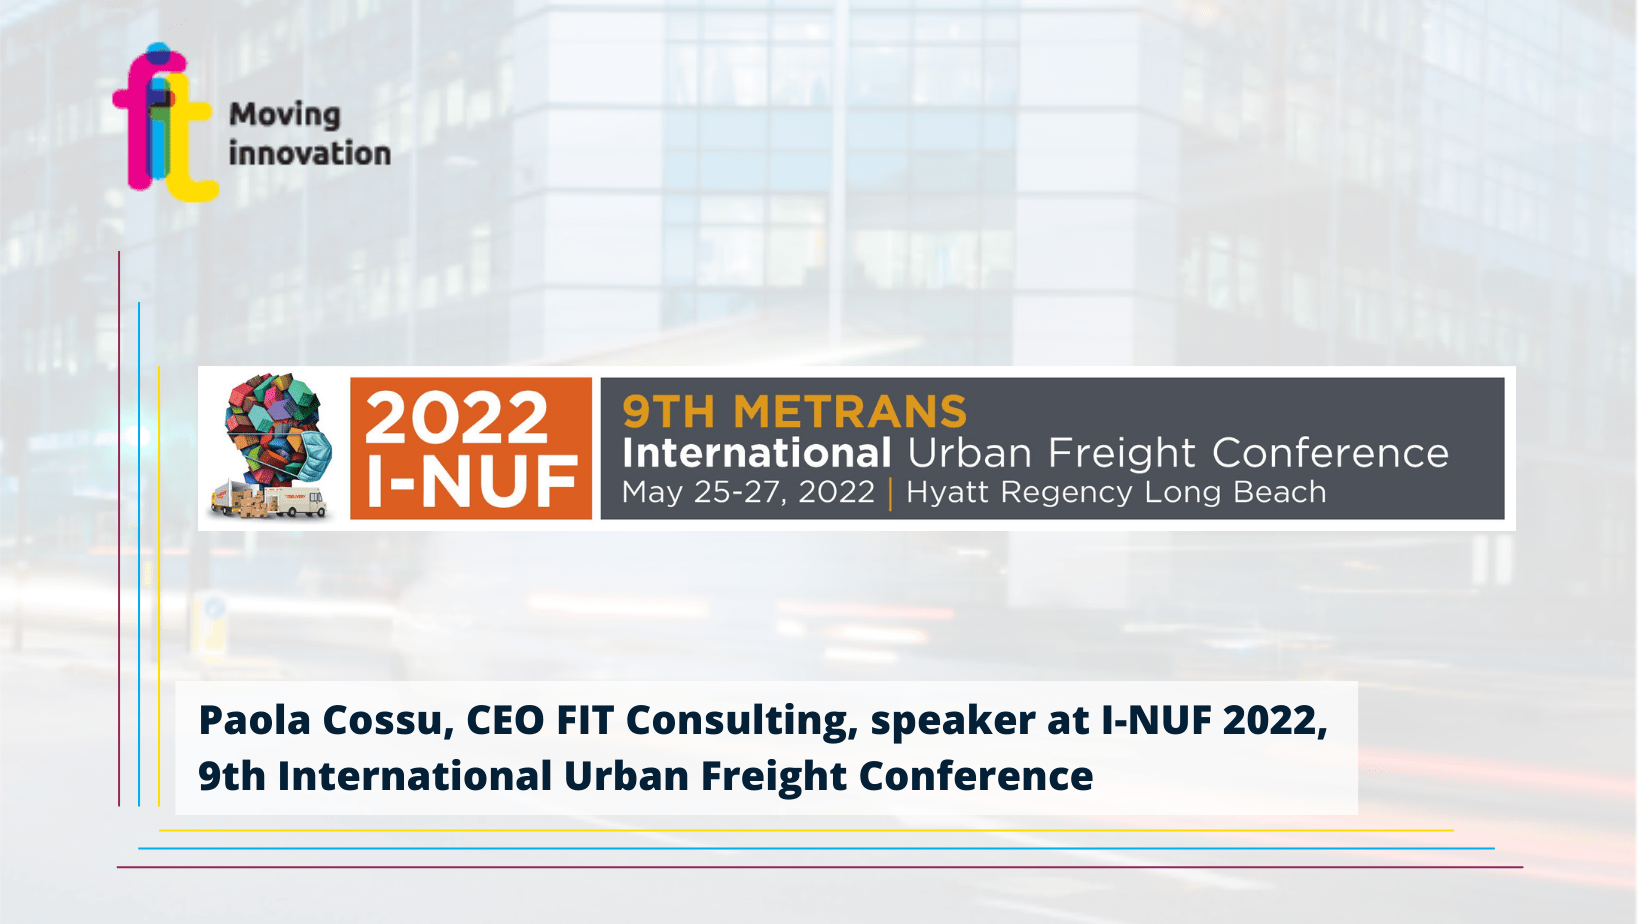 Paola Cossu, CEO FIT Consulting, speaker at I-NUF 2022, 9th International Urban Freight Conference